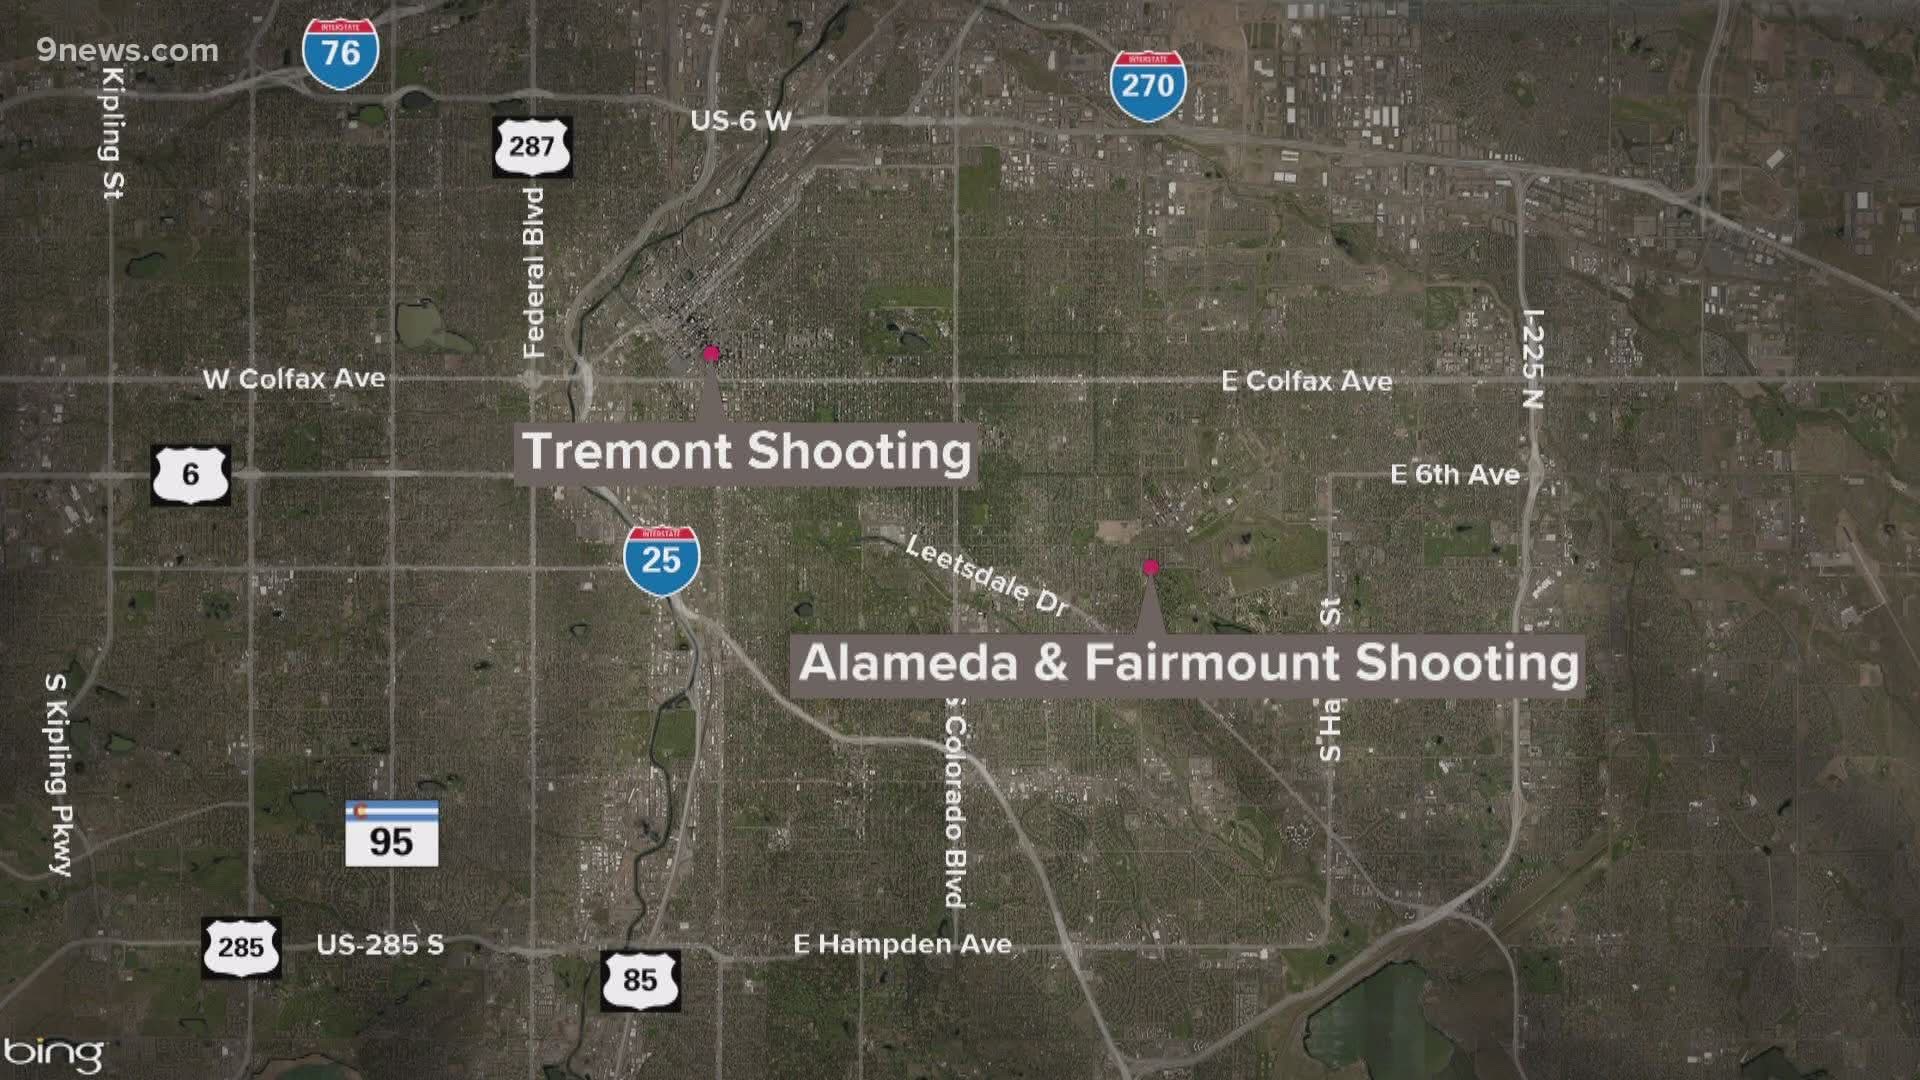 The shootings happened across the metro area from Saturday night into Sunday morning.